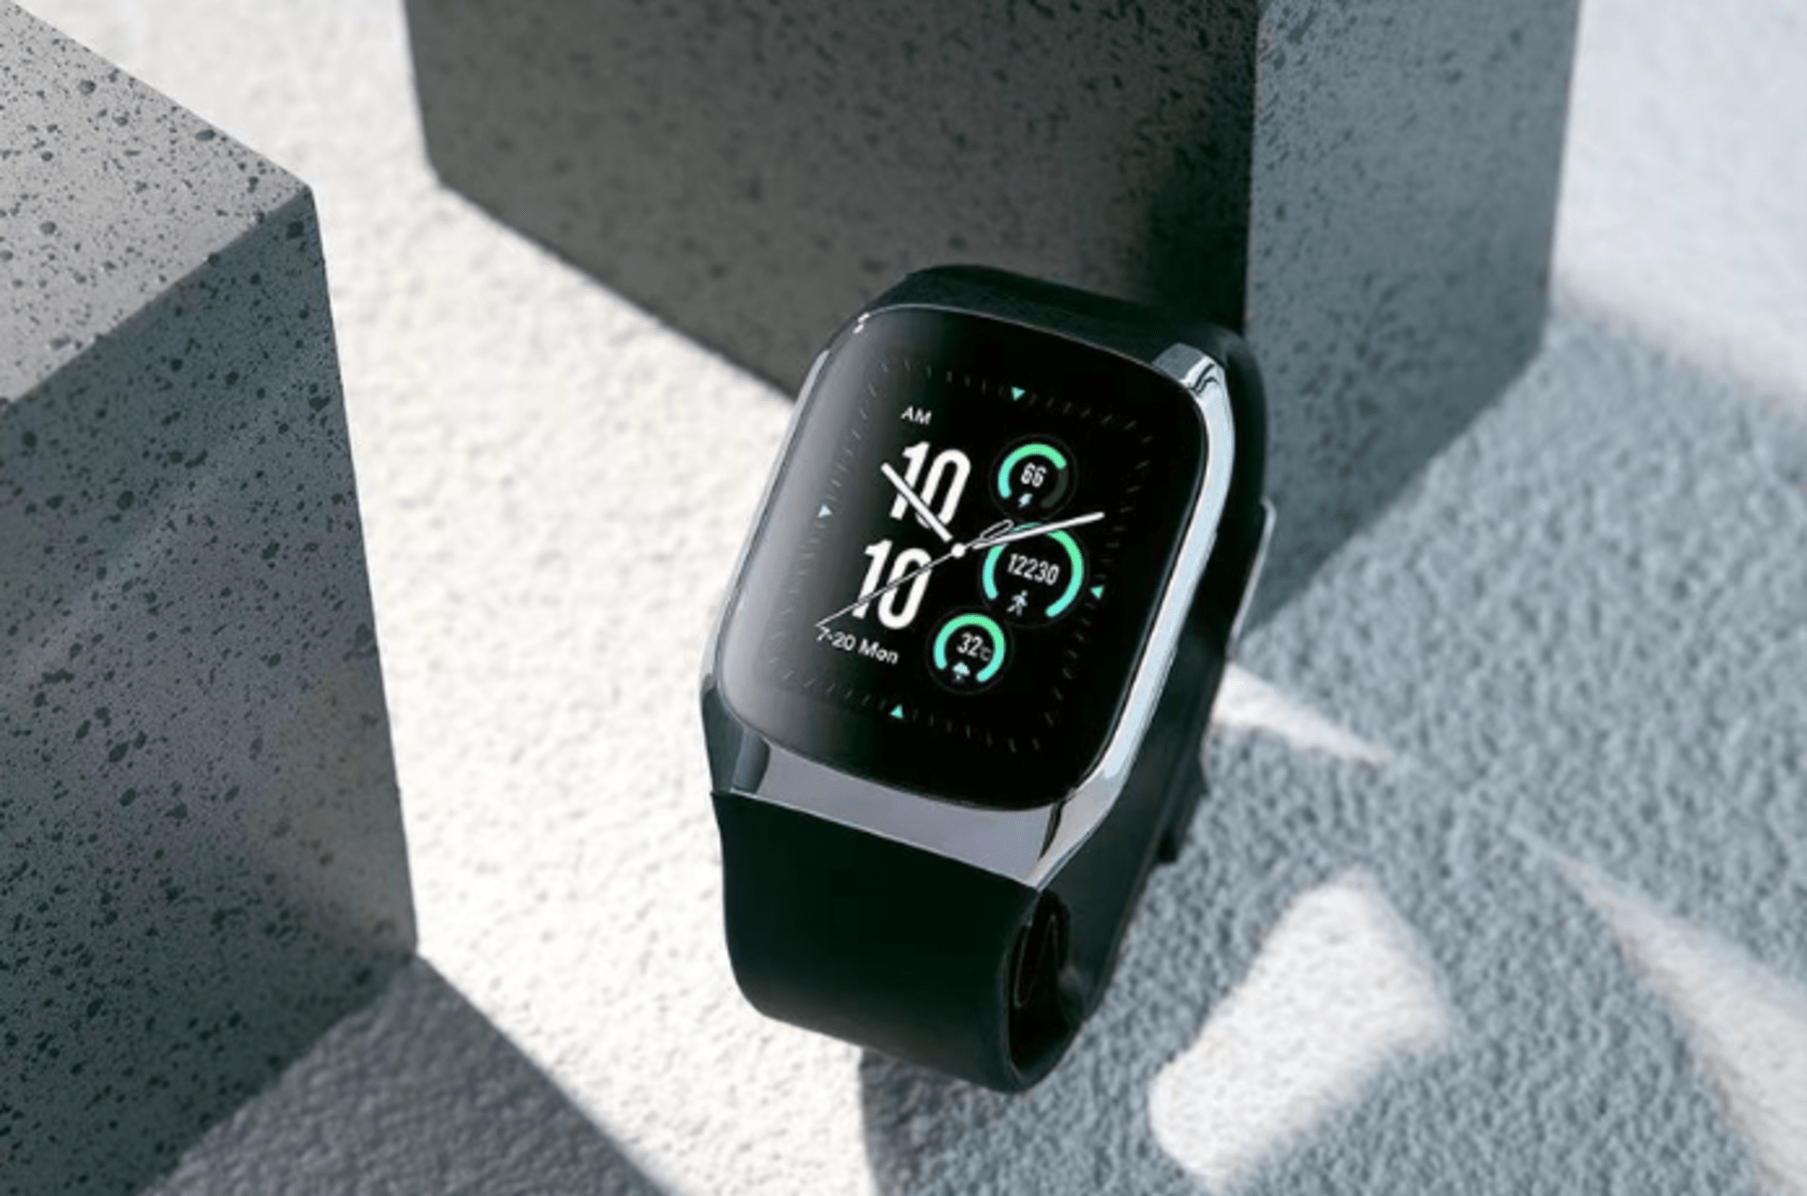 YHE BP Doctor Pro Smartwatch review - it's a blood pressure cuff